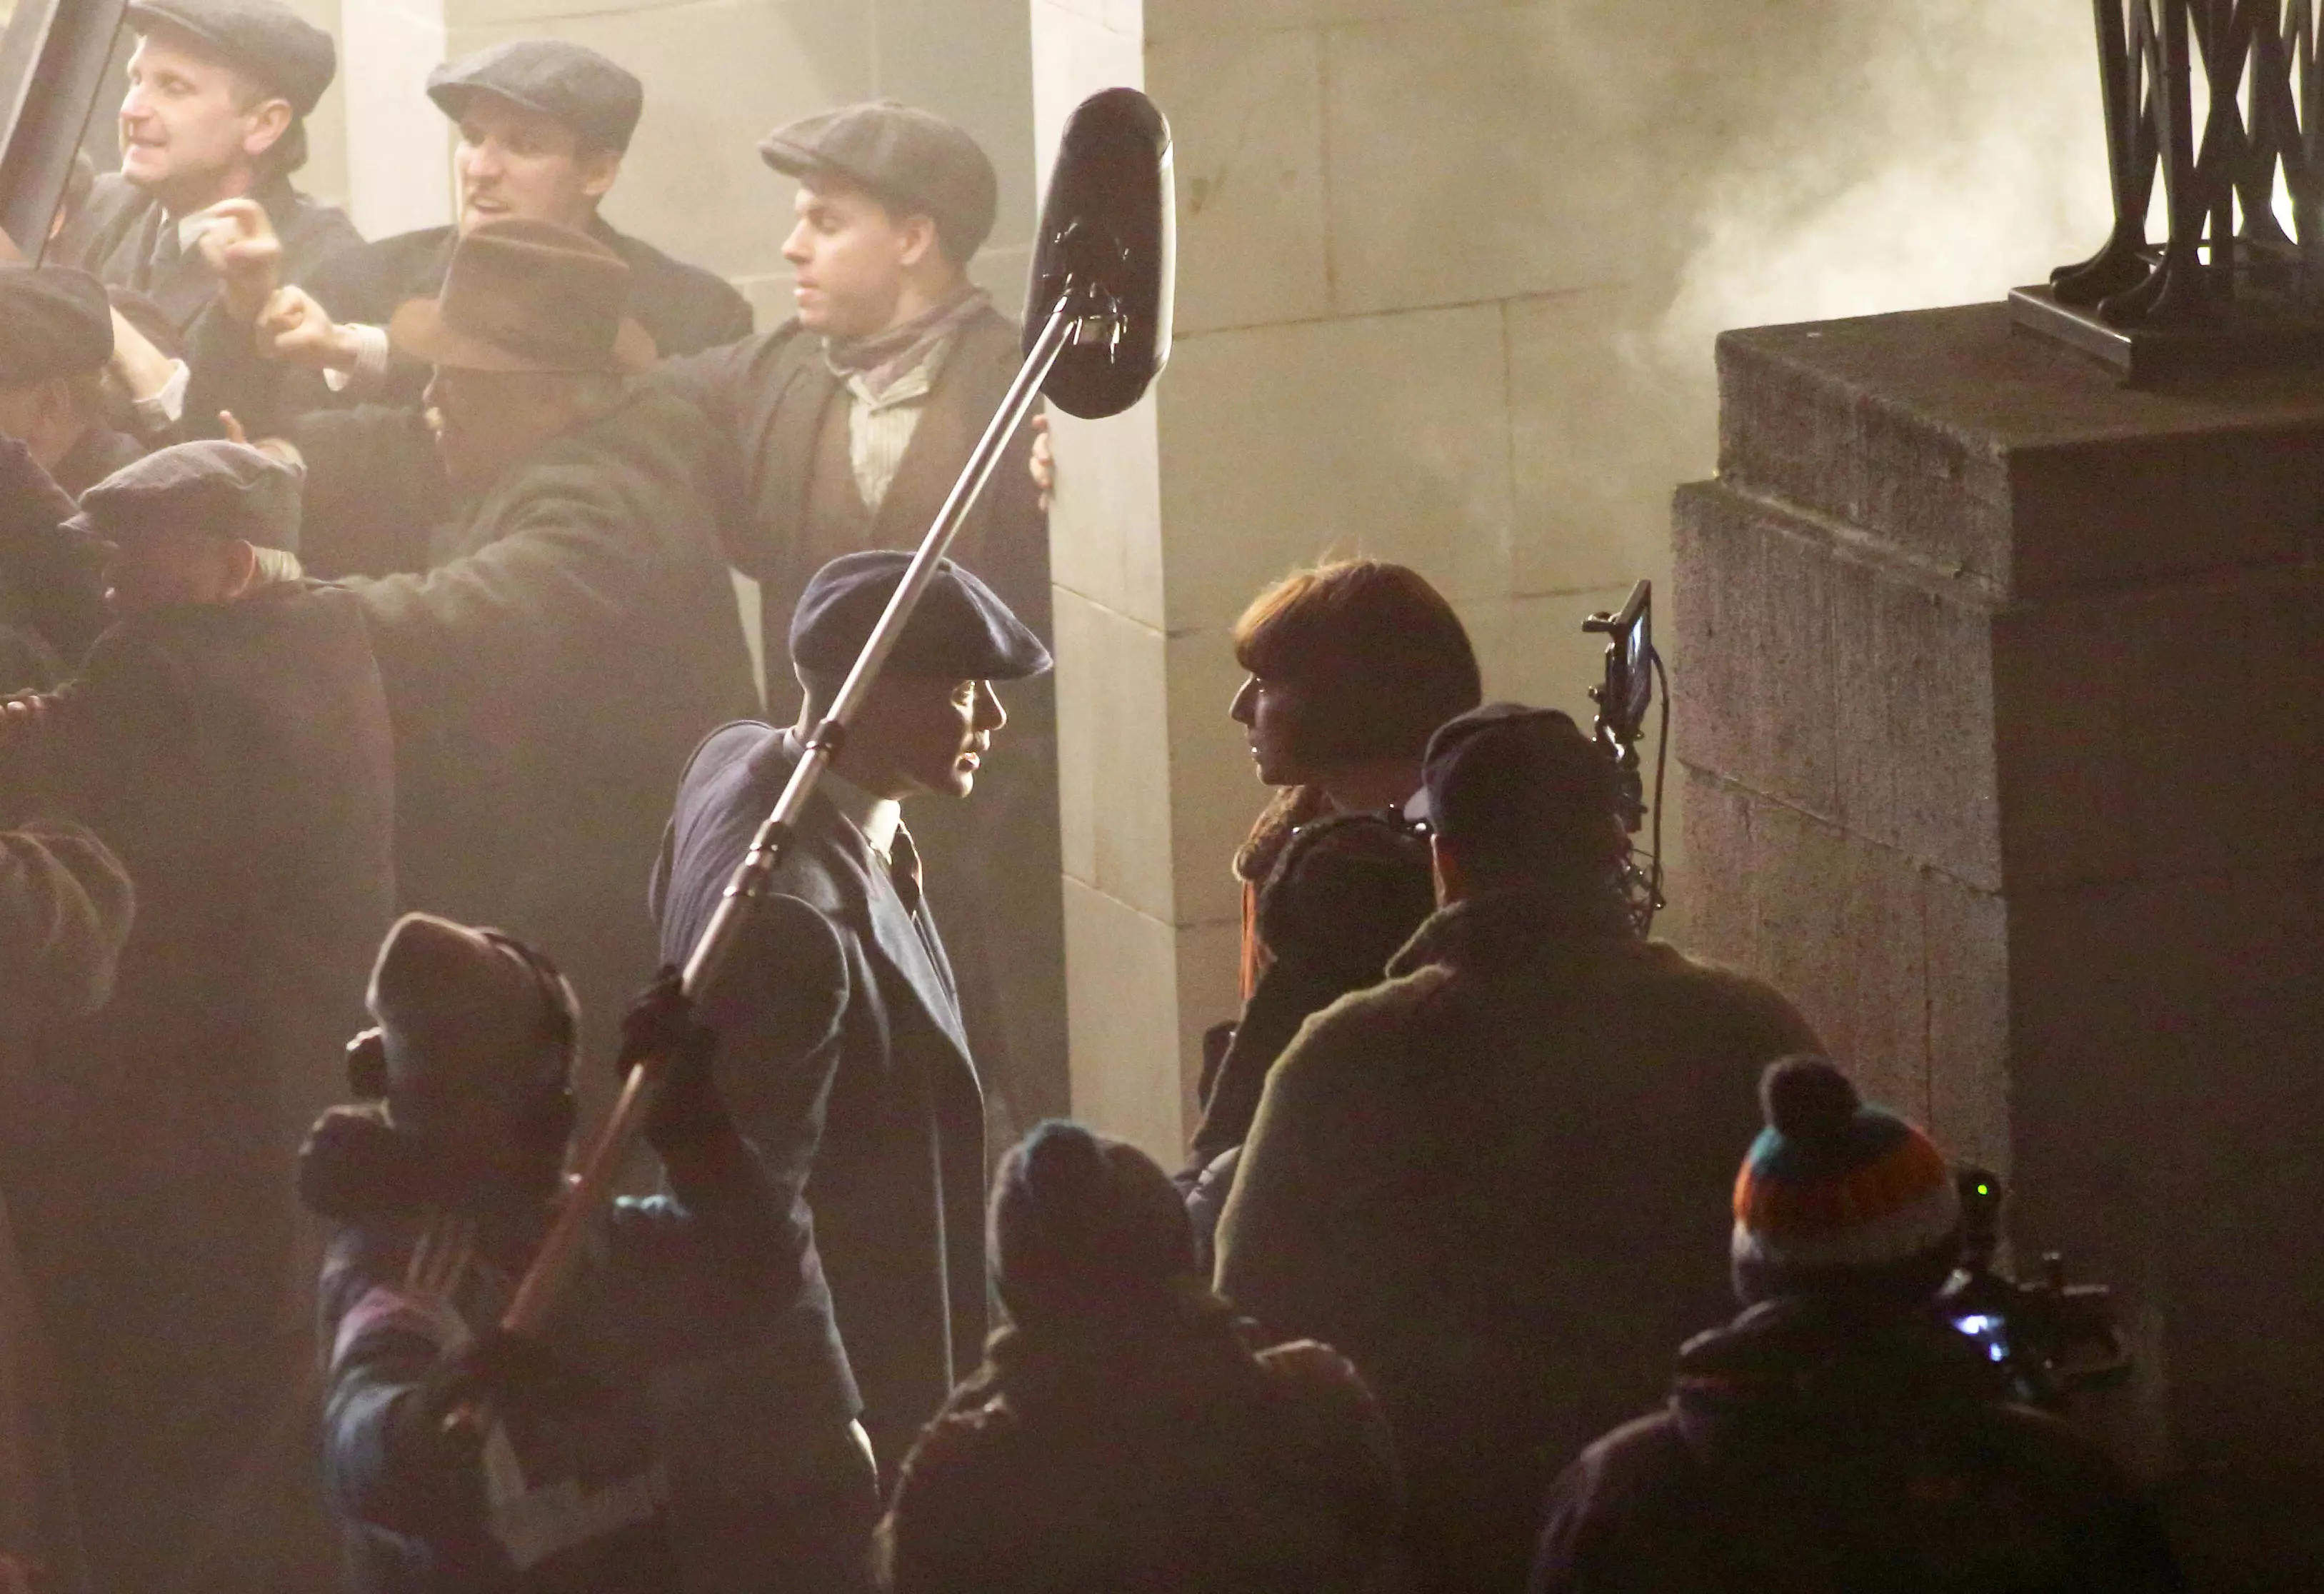 Cillian Murphy spotted in Stockport filming 'Peaky Blinders'.